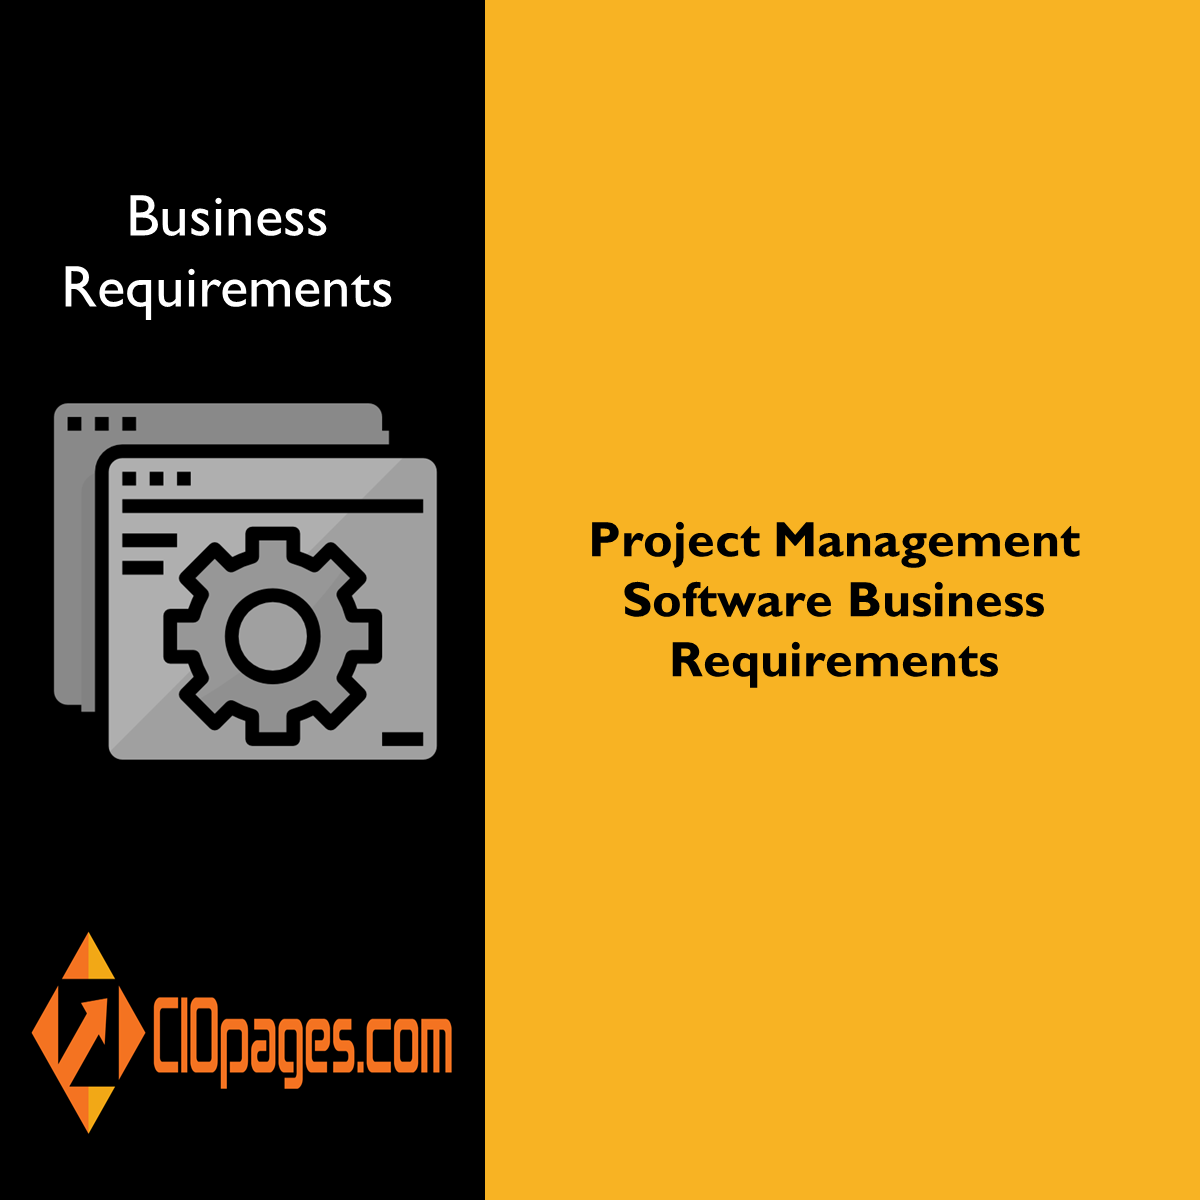 Project Management Software Business Requirements